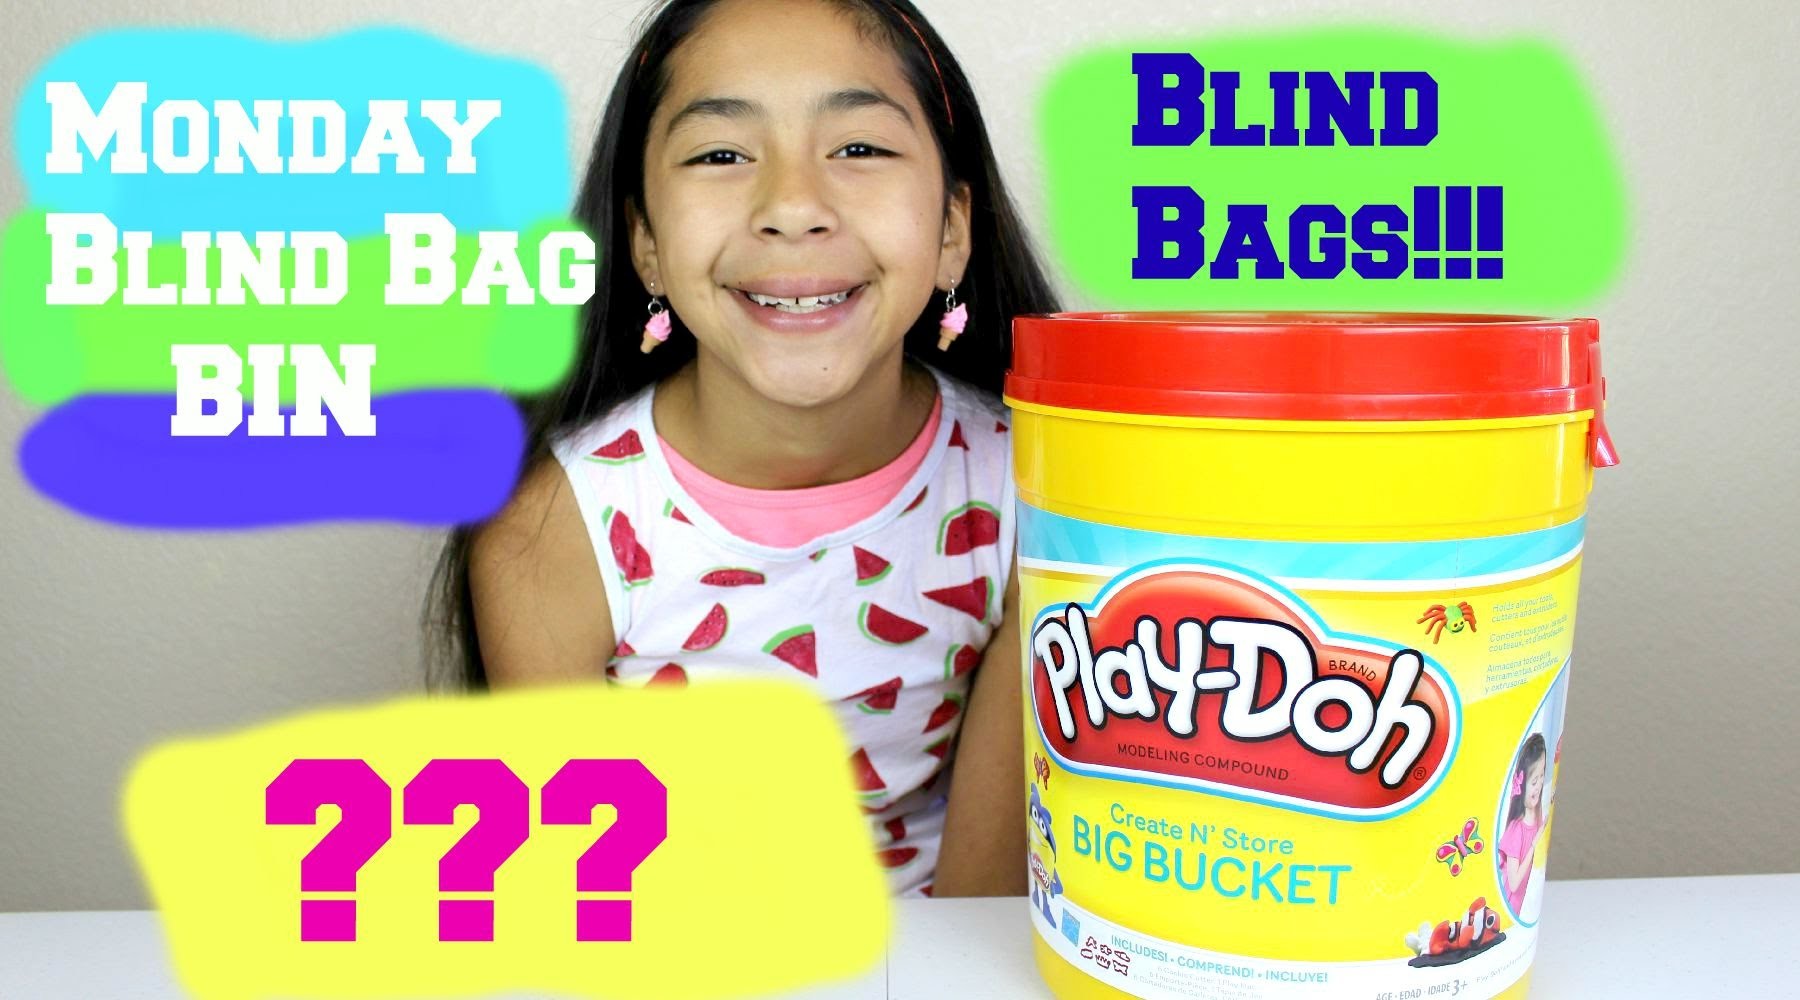 How to make blind bags